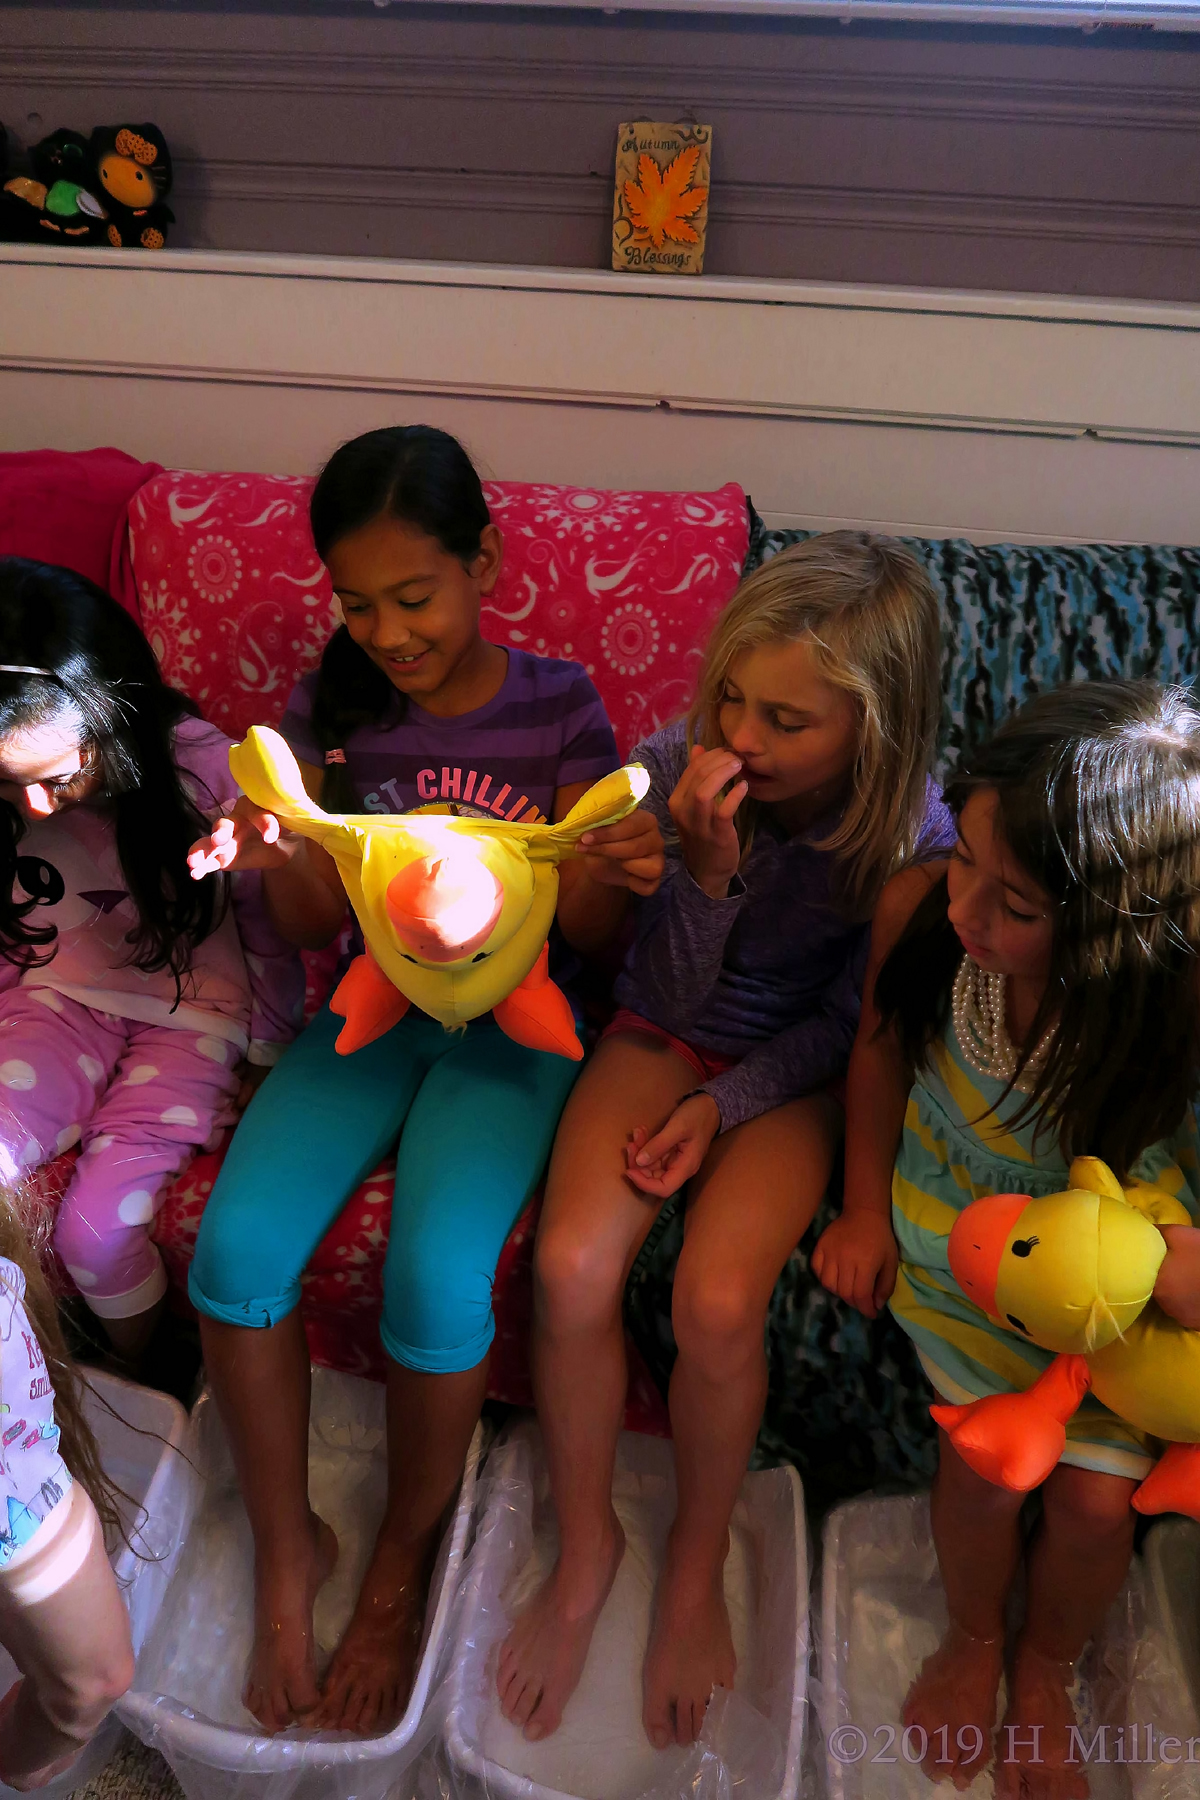 Fun Duck Toys During Kids Pedicures With Keira's Friend 